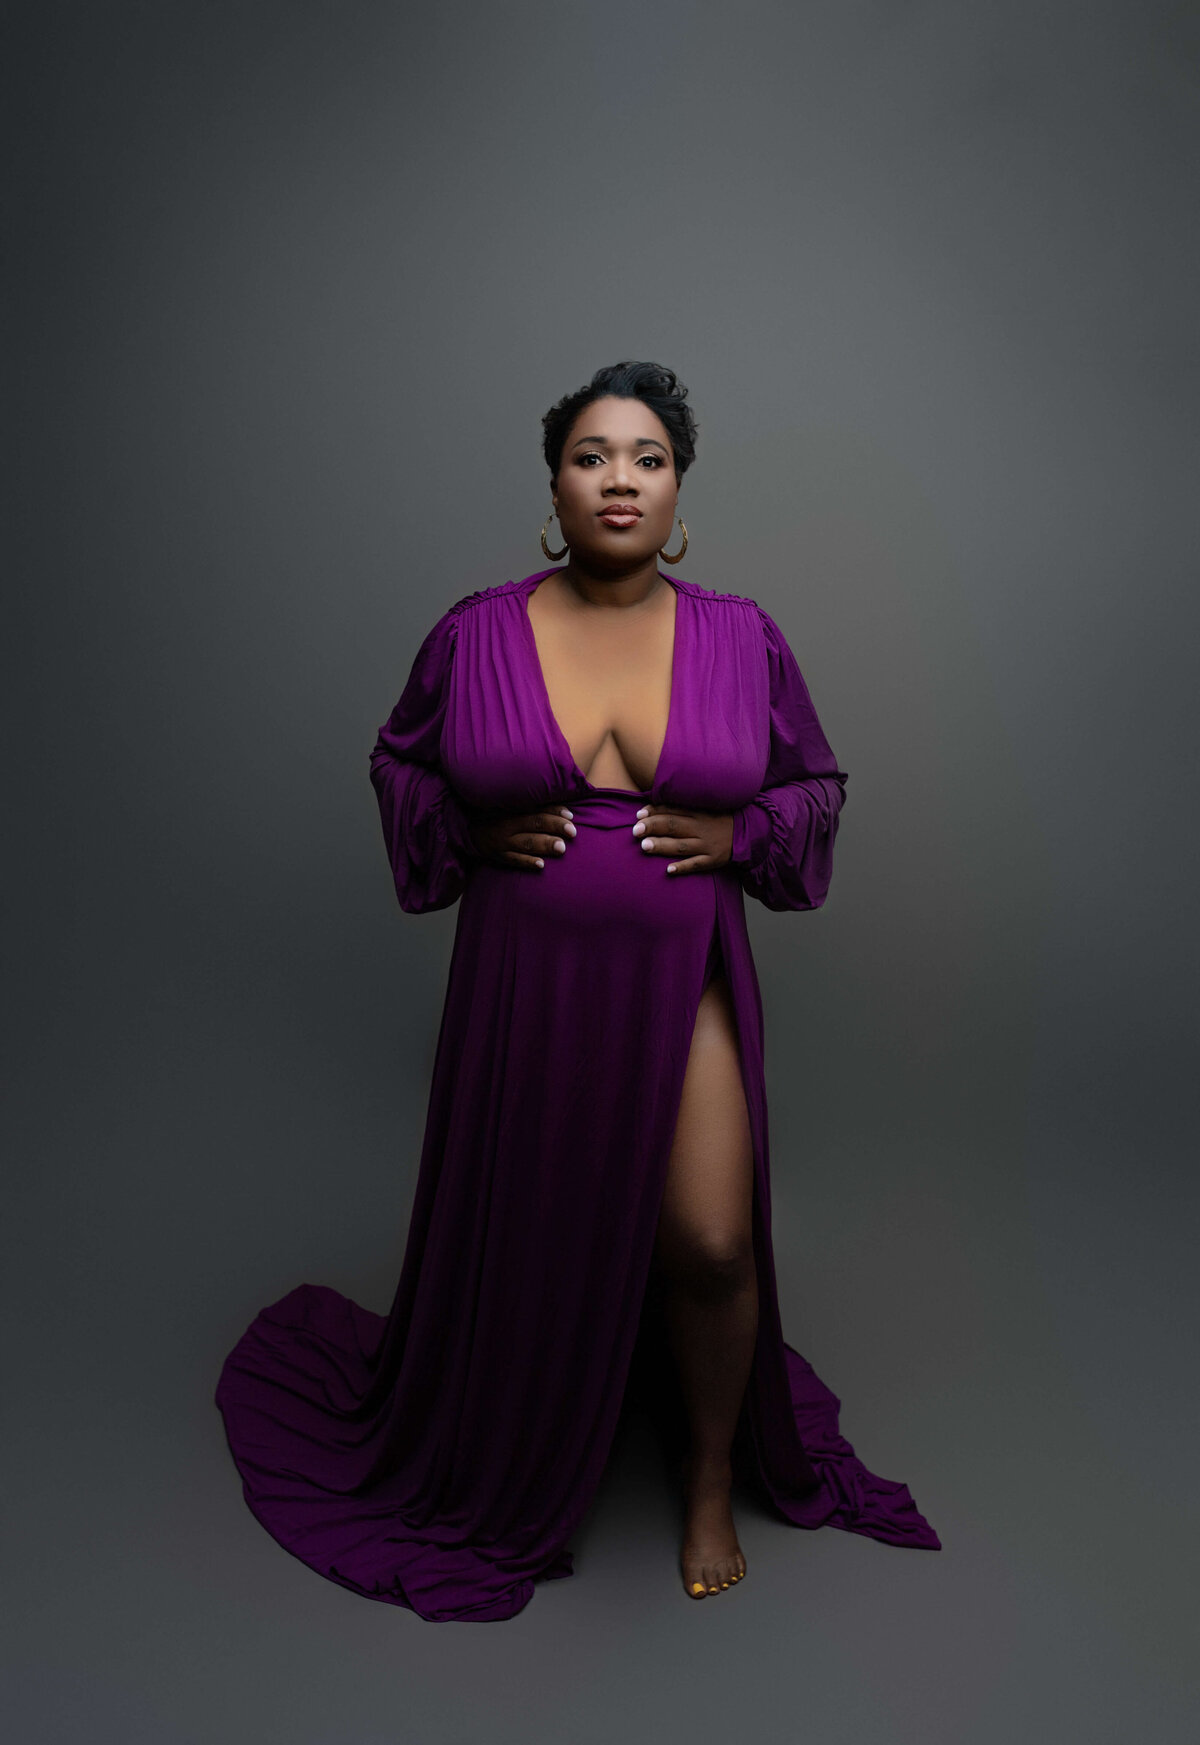 A powerful pregnant black woman stands in a purple dress in a studio